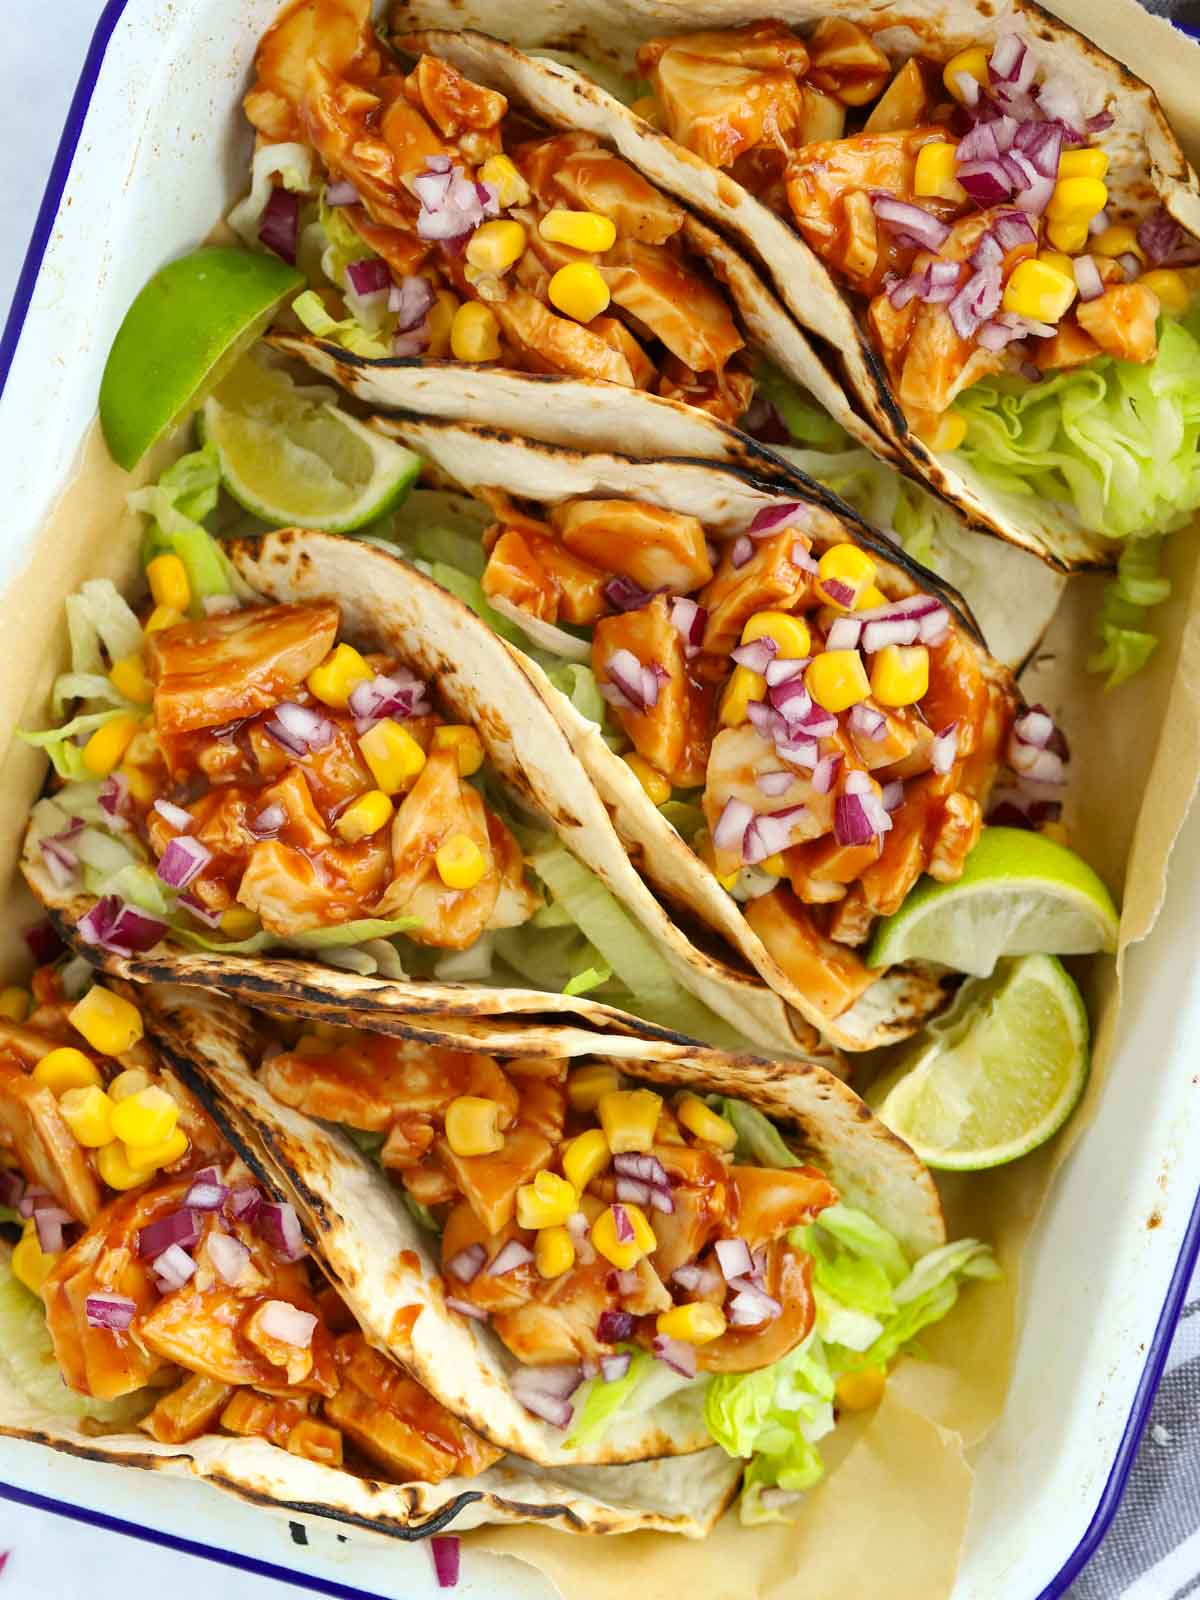 Chicken and brace tacos filled with lettuce, sweetcorn and red onion